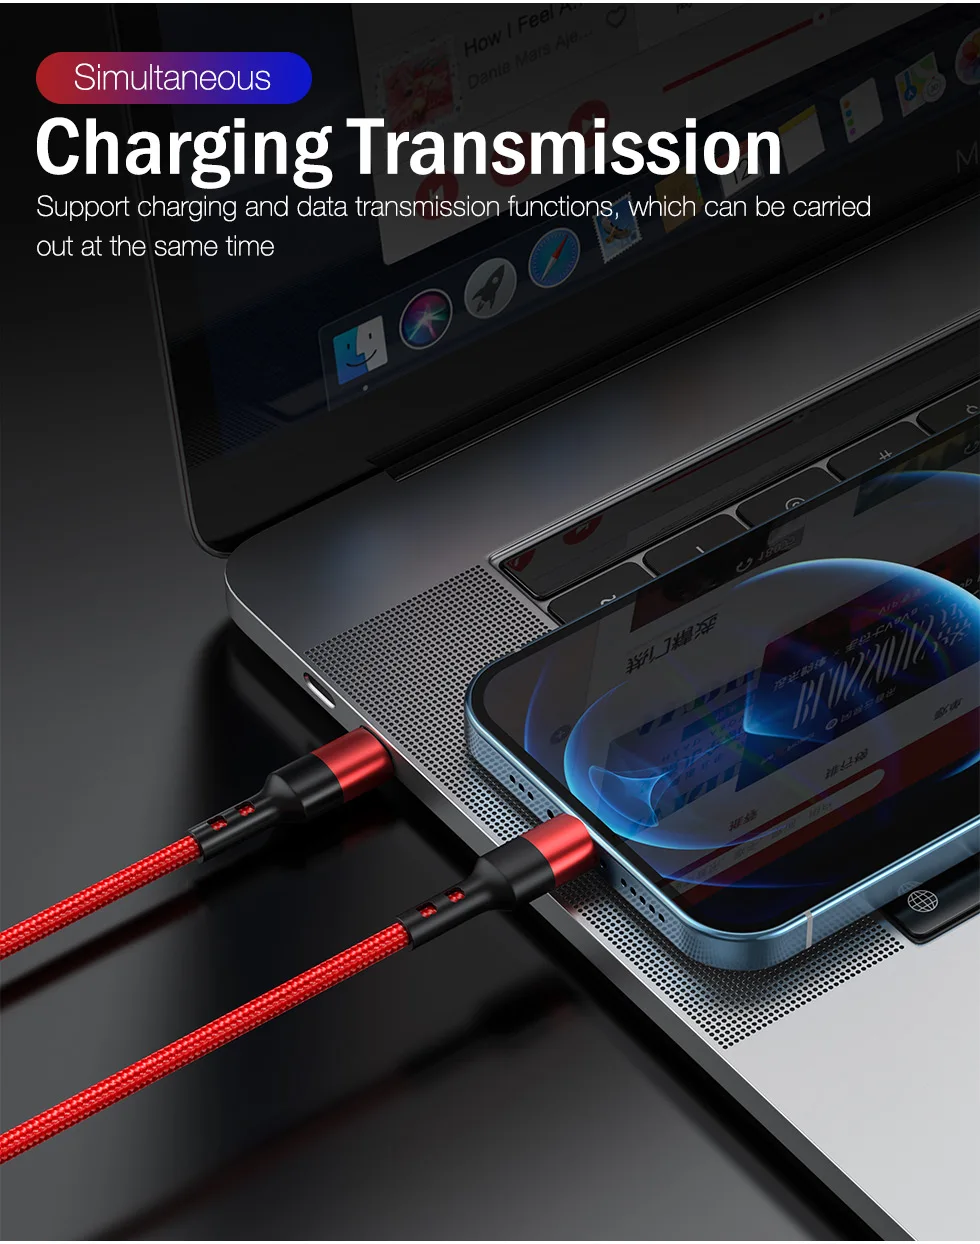 android charger PD USB C Quick Charge Charger Cable For iPhone 13 12 11 Pro Max Xs X XR 7 8 Plus SE iPad MacBook USBC Type c Data Long Wire Cord best fast charging cable for android